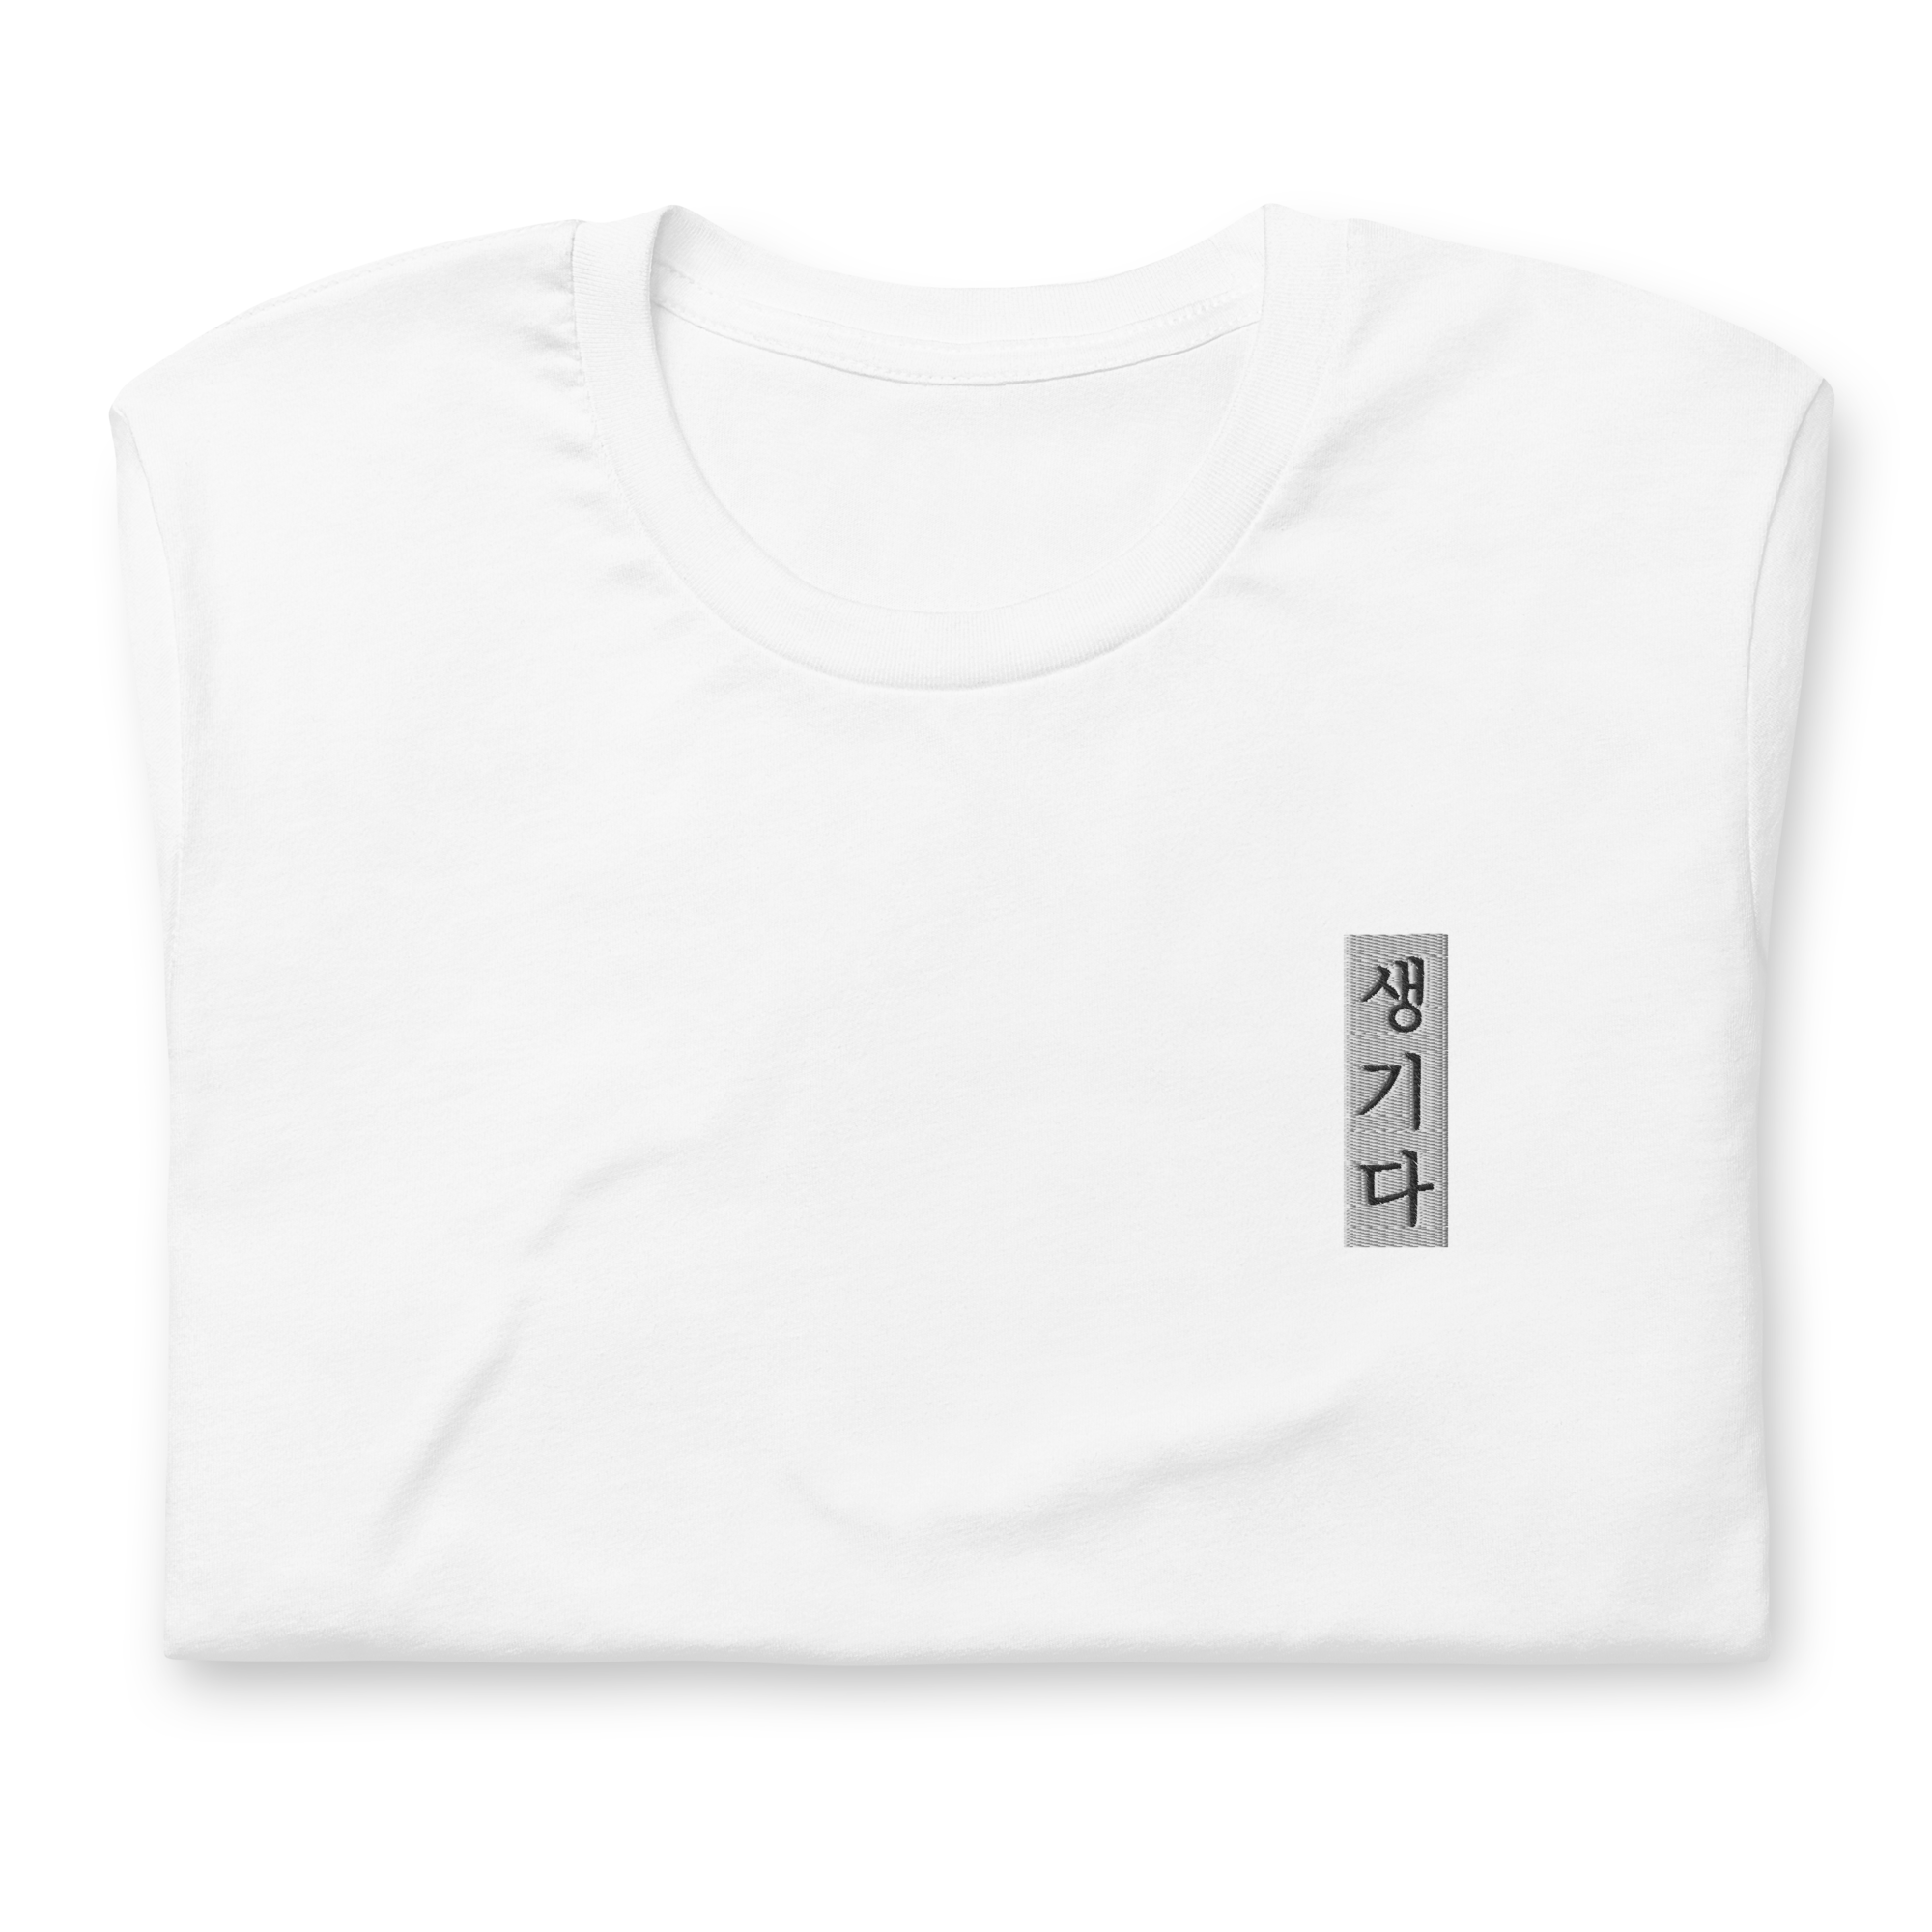 ARISE - Embroidery T-Shirt